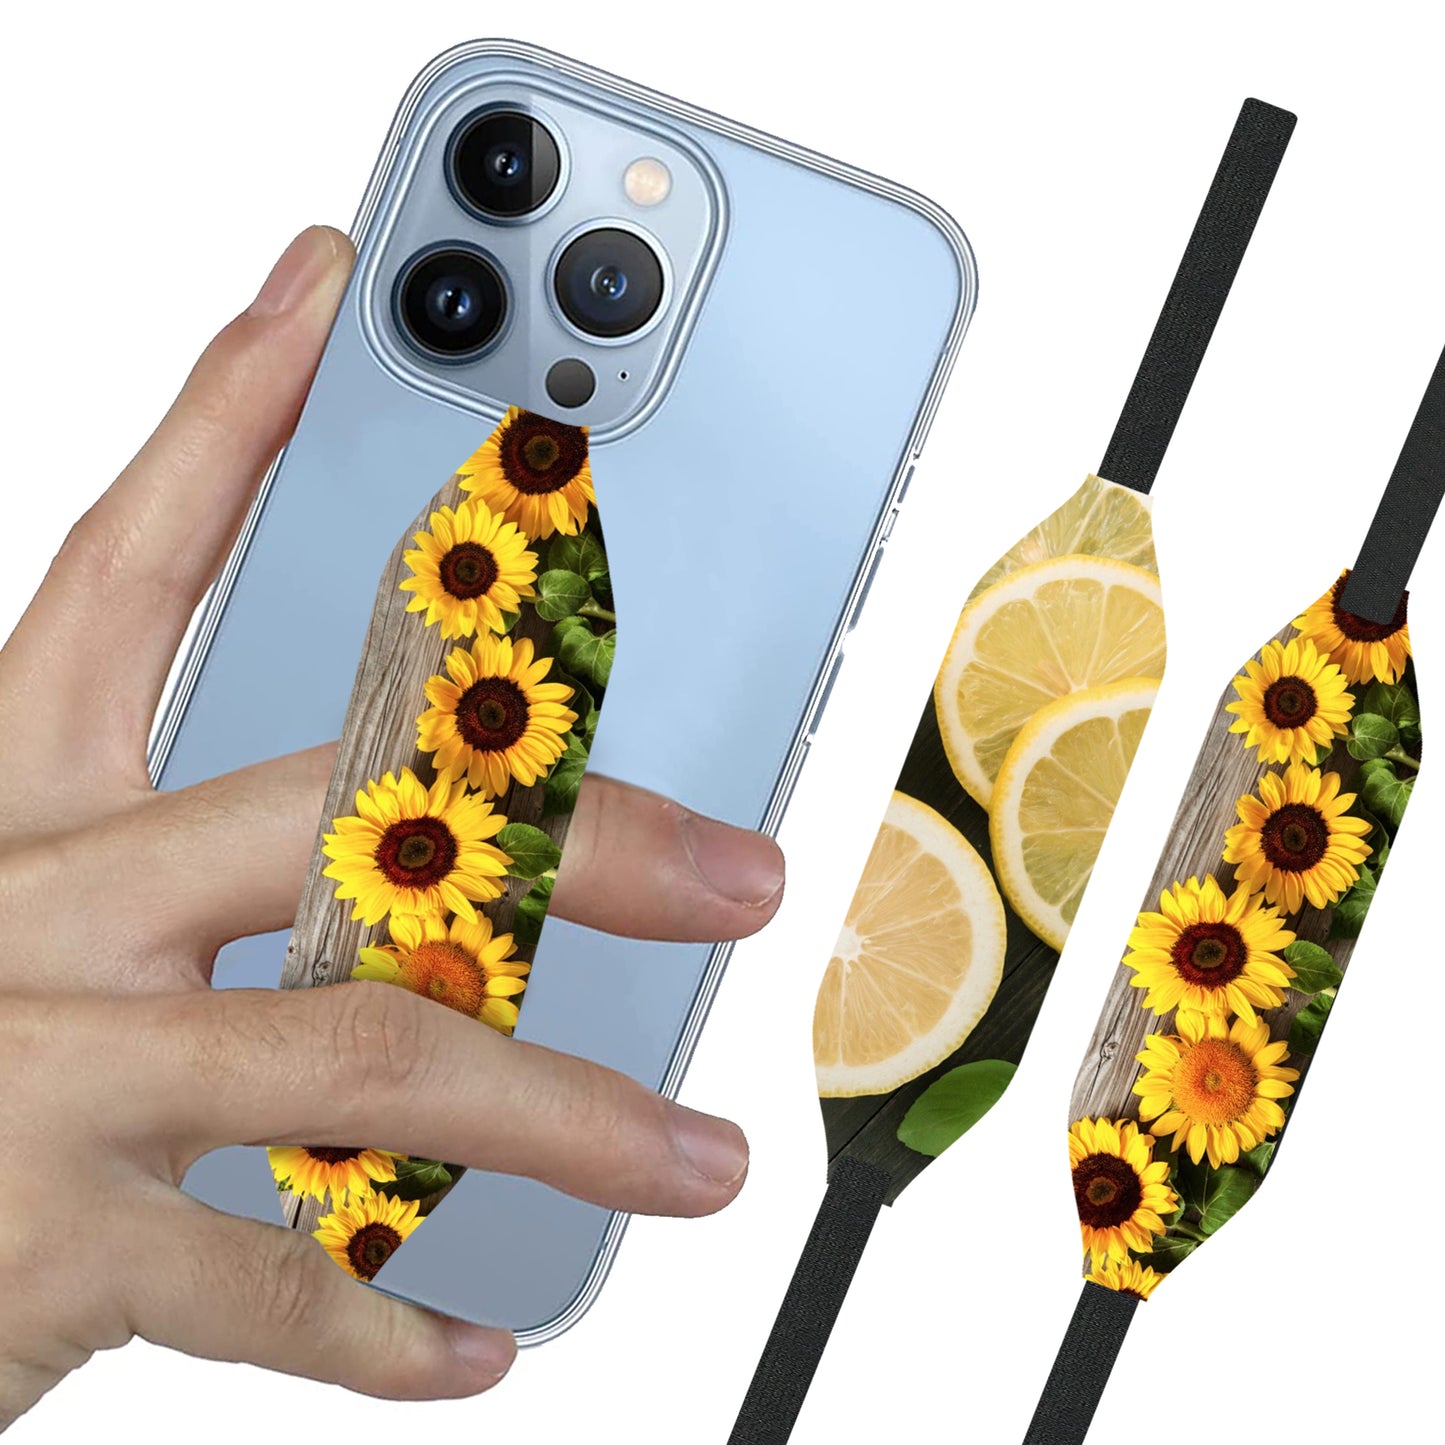 Switchbands Universal Stretchable Phone Hand Straps And Finger Loop For Phone Cases - Gold & Blue Marble